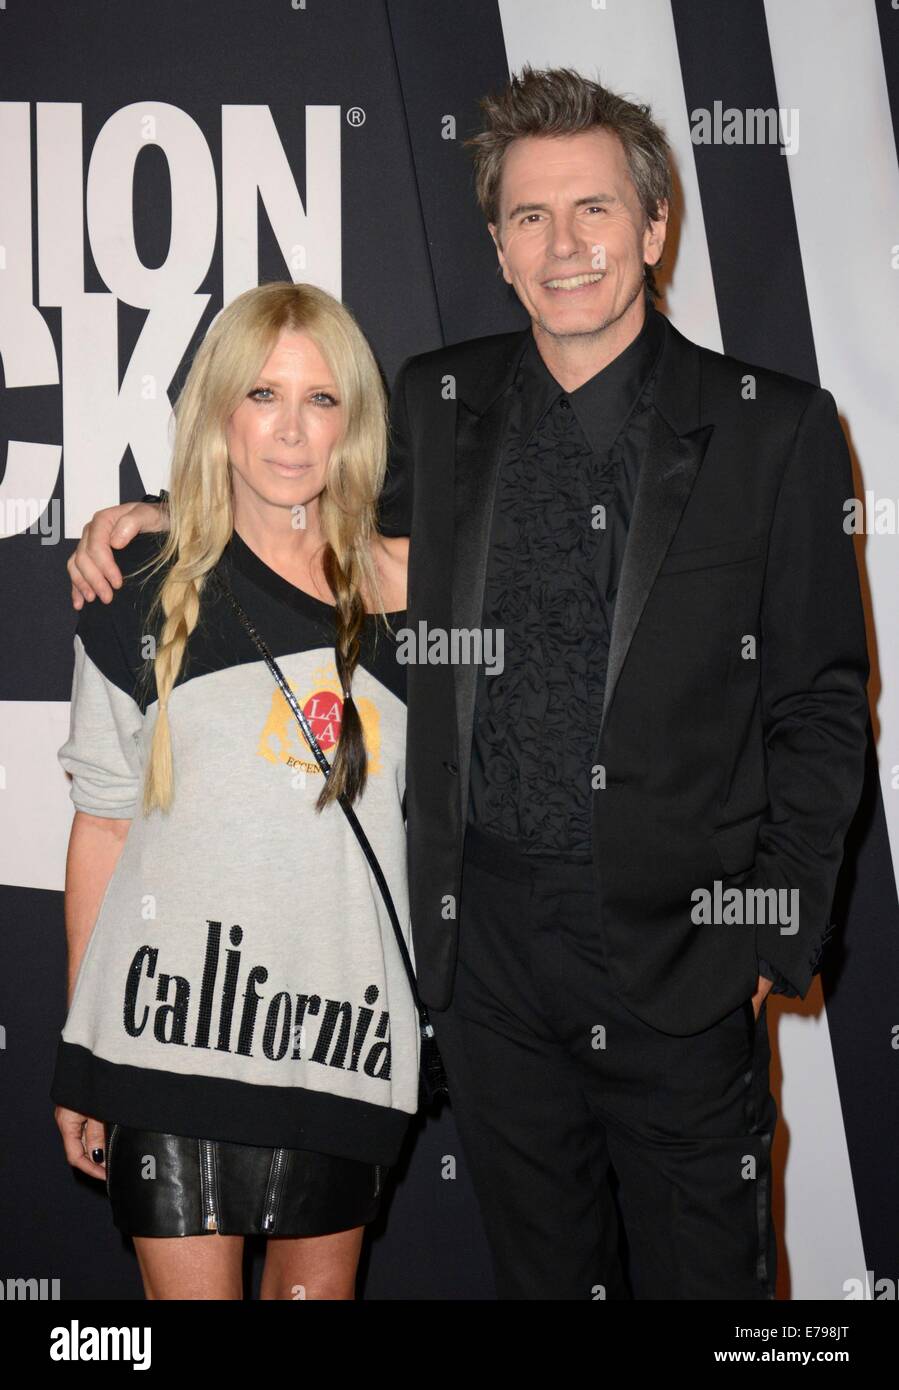 Brooklyn, NY, USA. 9th Sep, 2014. John Taylor, wife Gela Nash-Taylor at arrivals for Conde Nast Fashion Rocks Concert 2014, Barclays Center, Brooklyn, NY September 9, 2014. Credit:  Derek Storm/Everett Collection/Alamy Live News Stock Photo